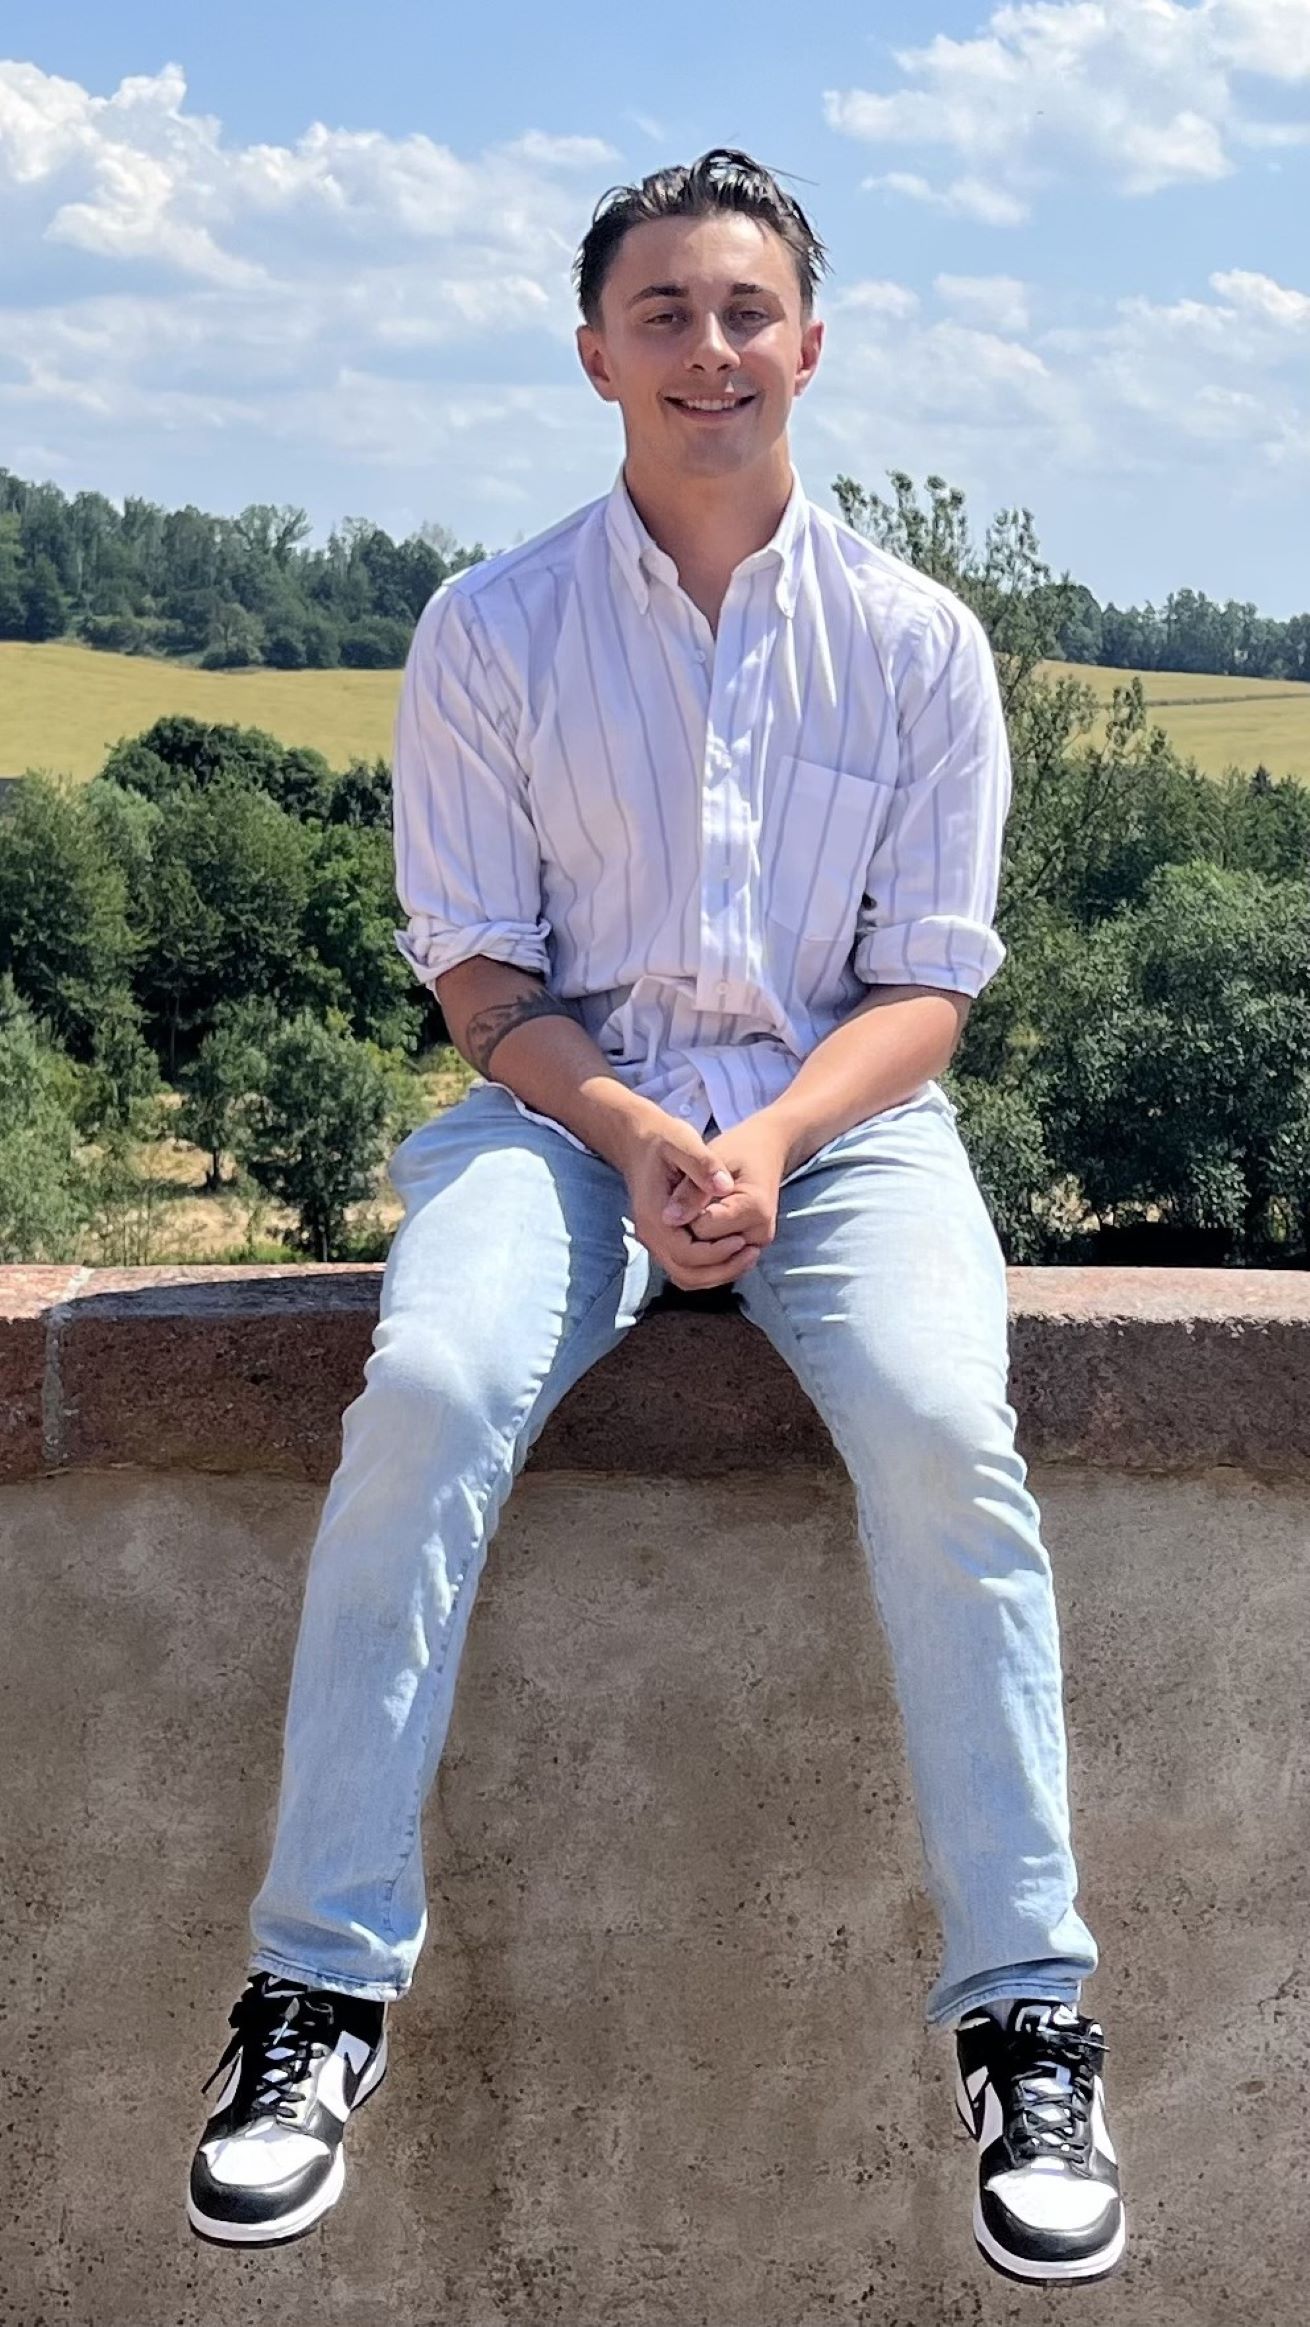 Devan Martin smiling, wearing a white shirt and light wash jeans, sitting on a ledge in front of trees in the background